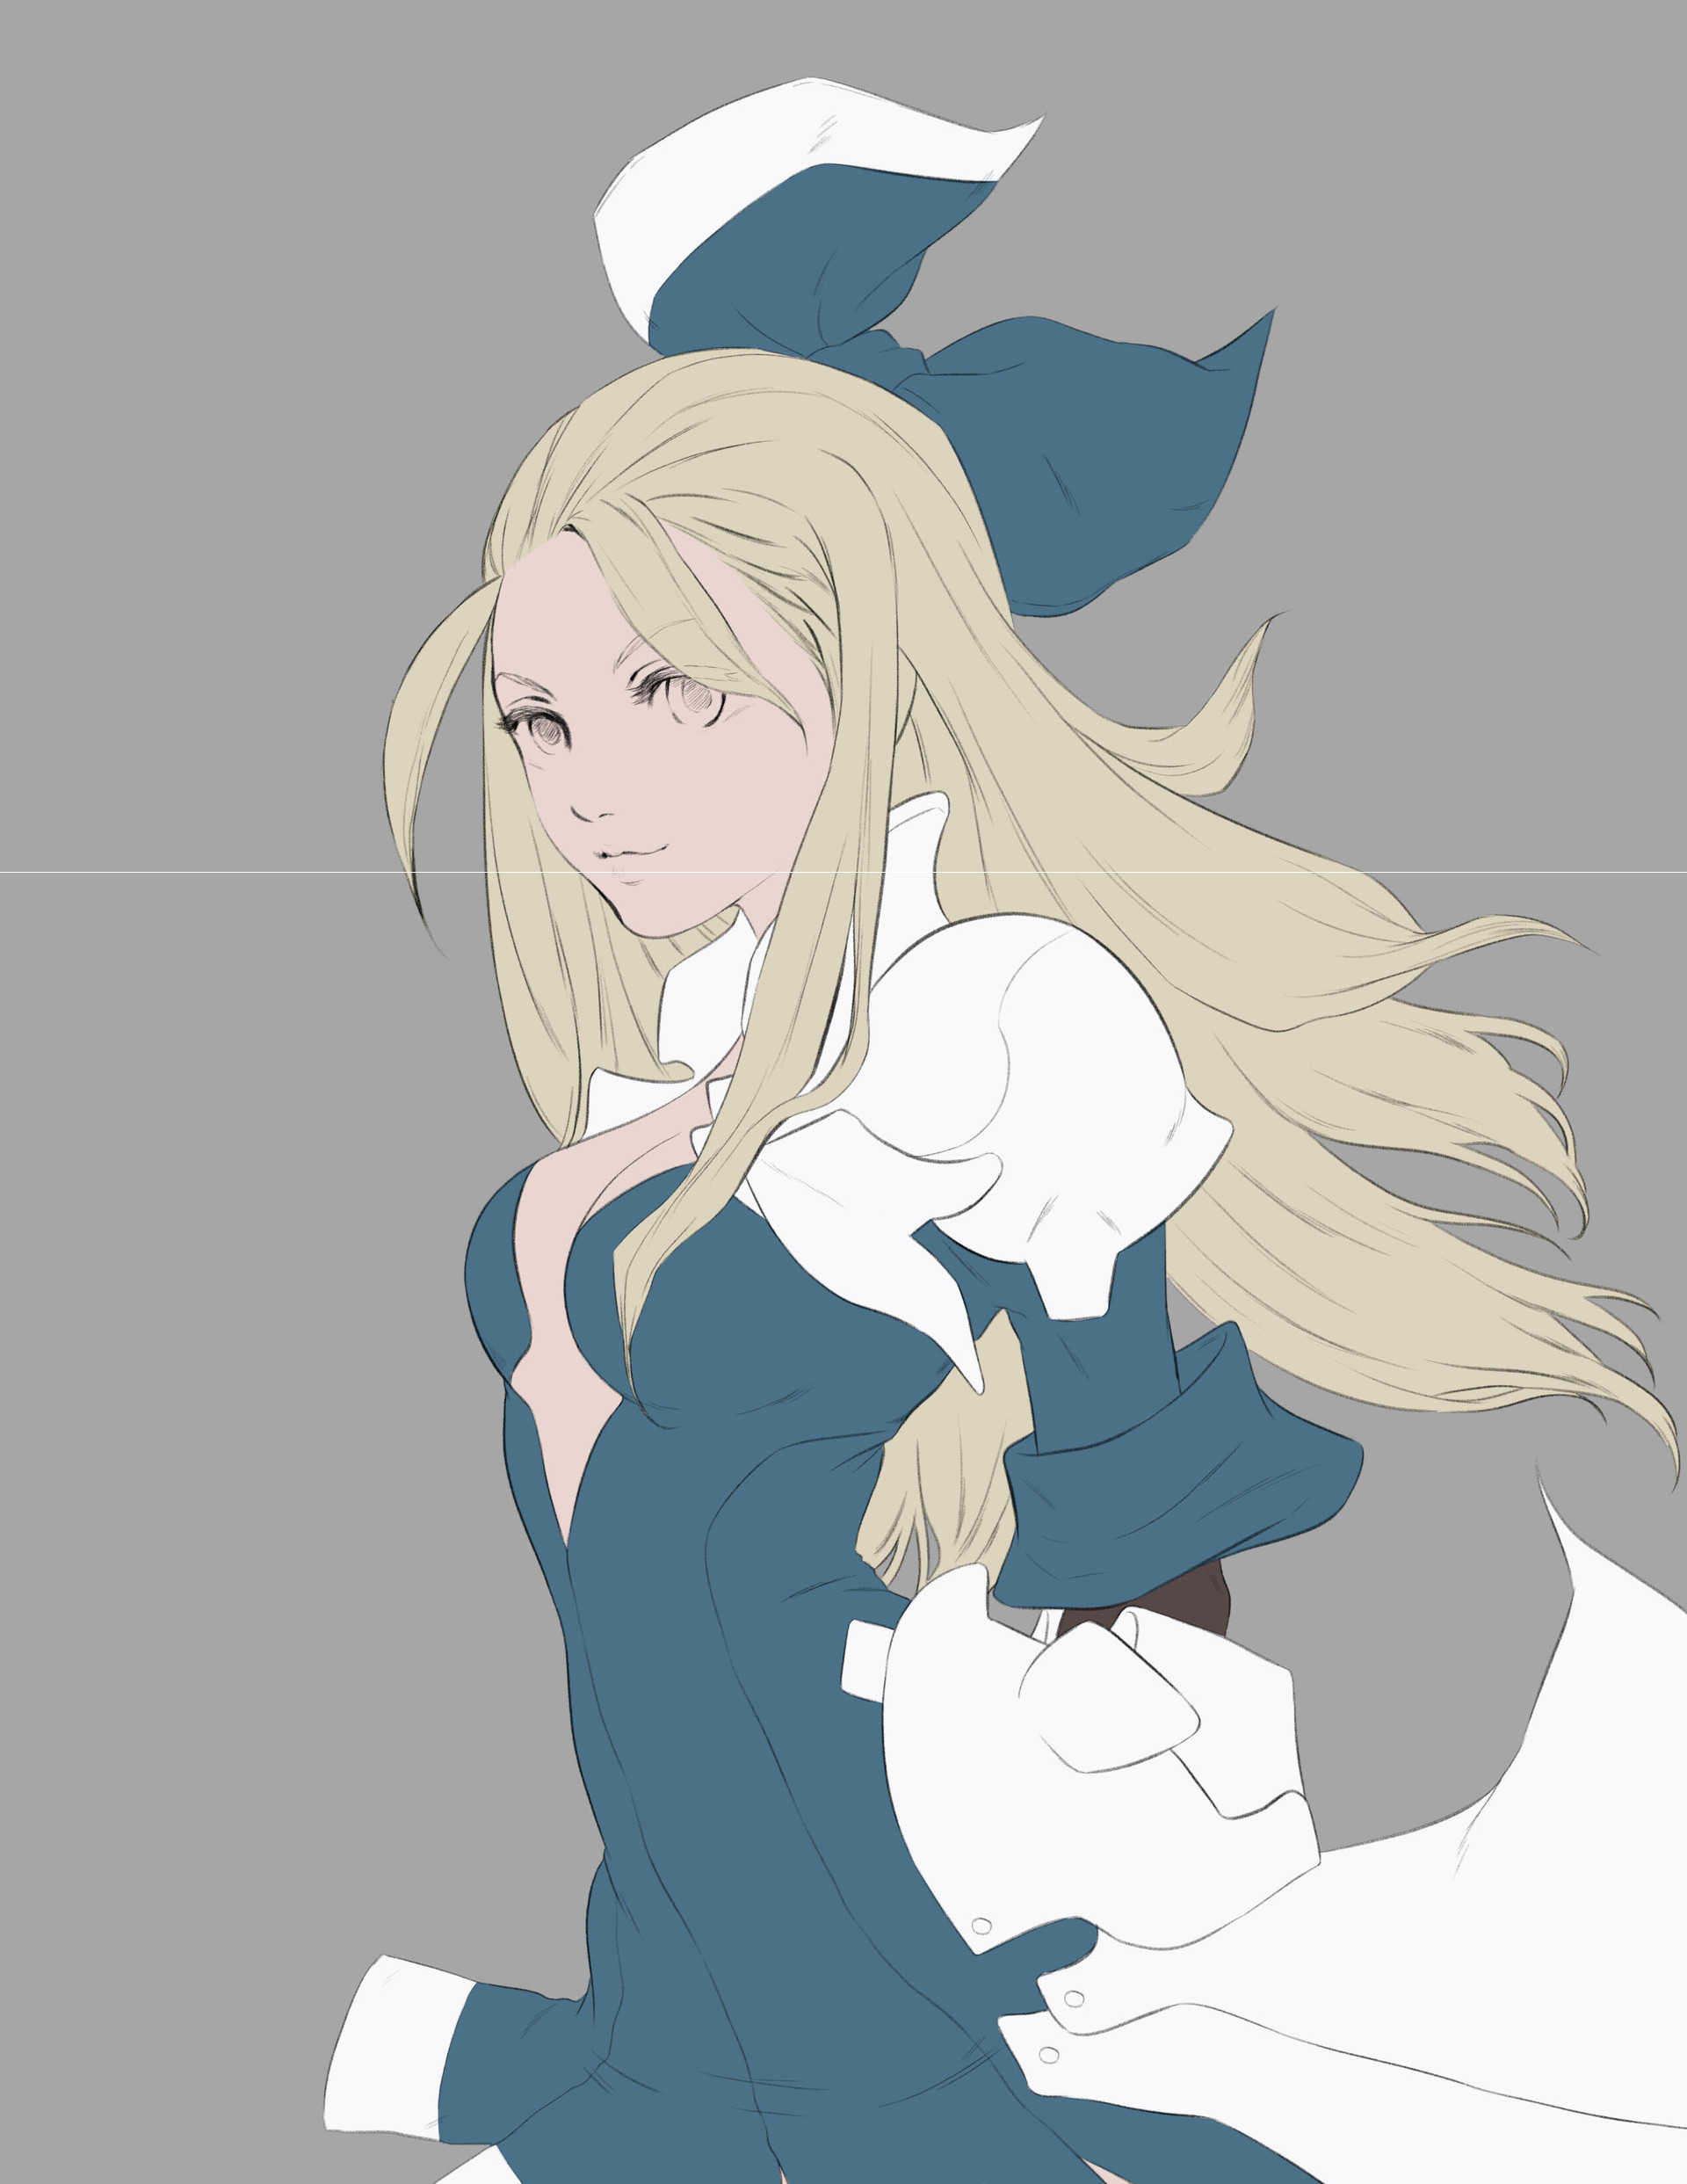 Cheyenne QO - Bravely Second's Edea Lee (with a bit of process)